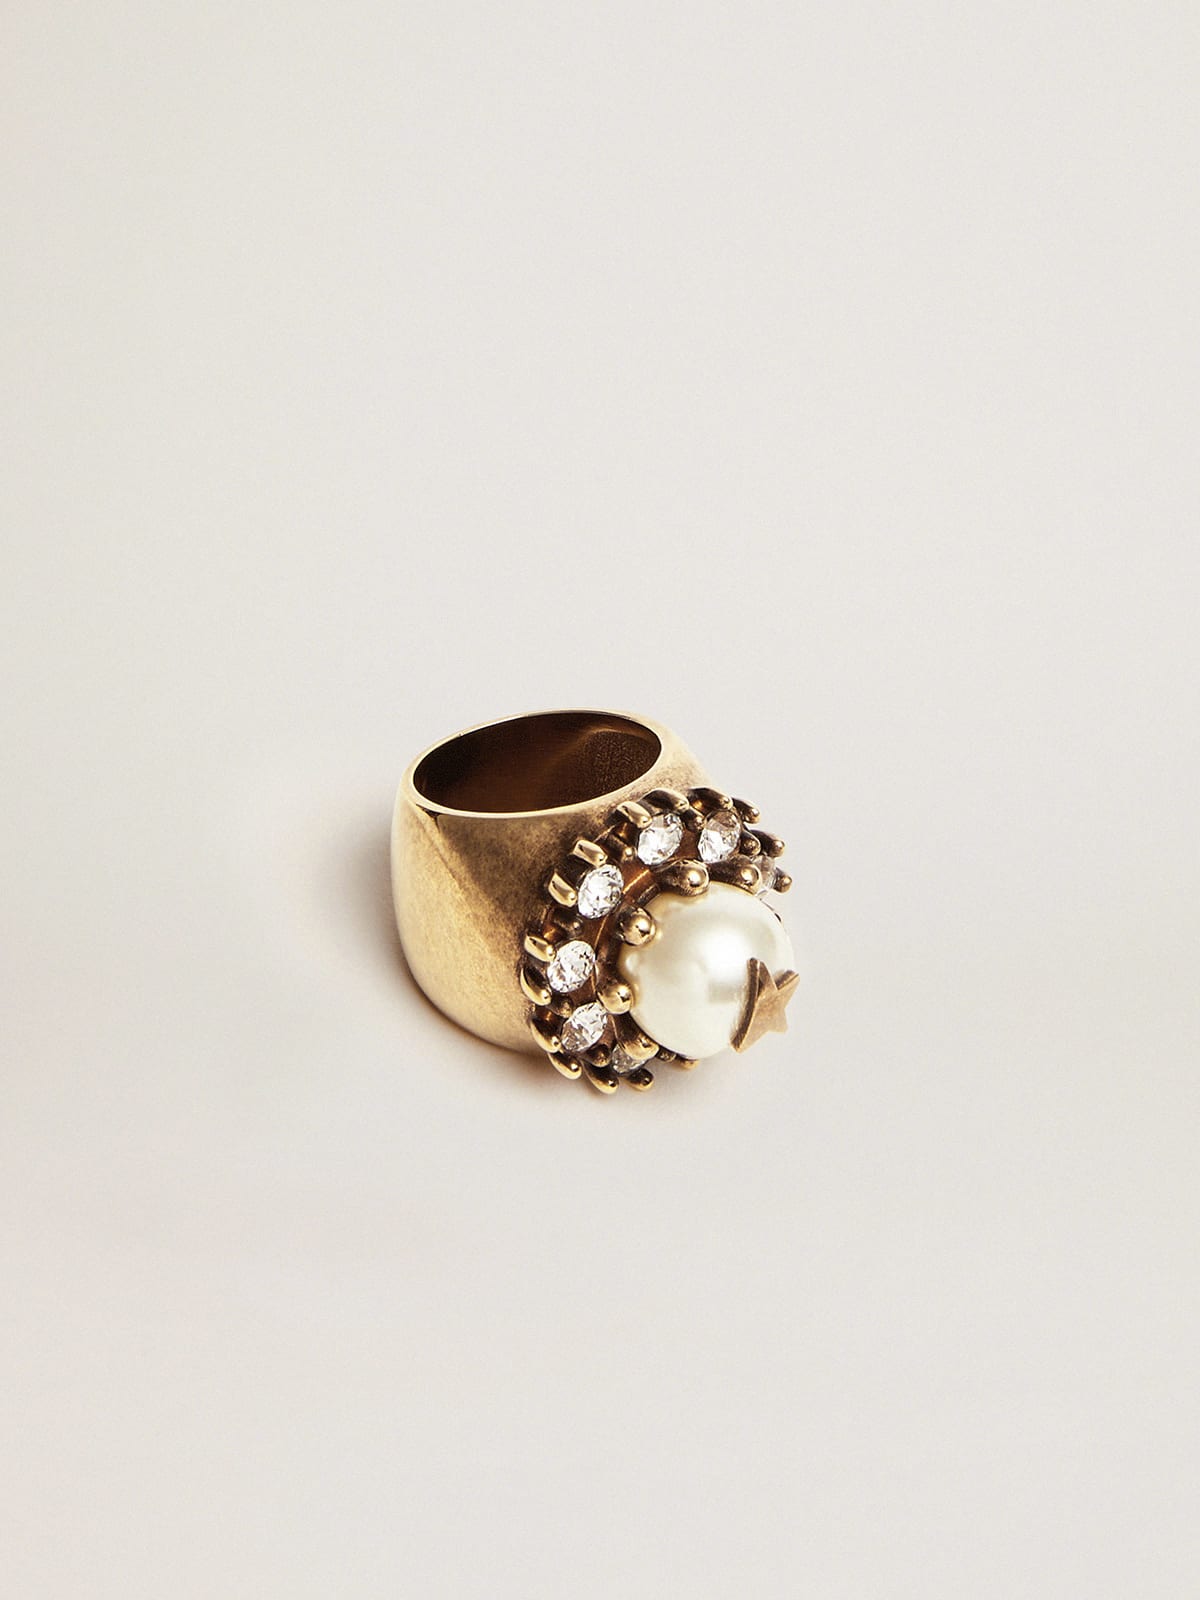 Golden Goose - Women’s ring in antique gold color with decorative bead and crystals in 